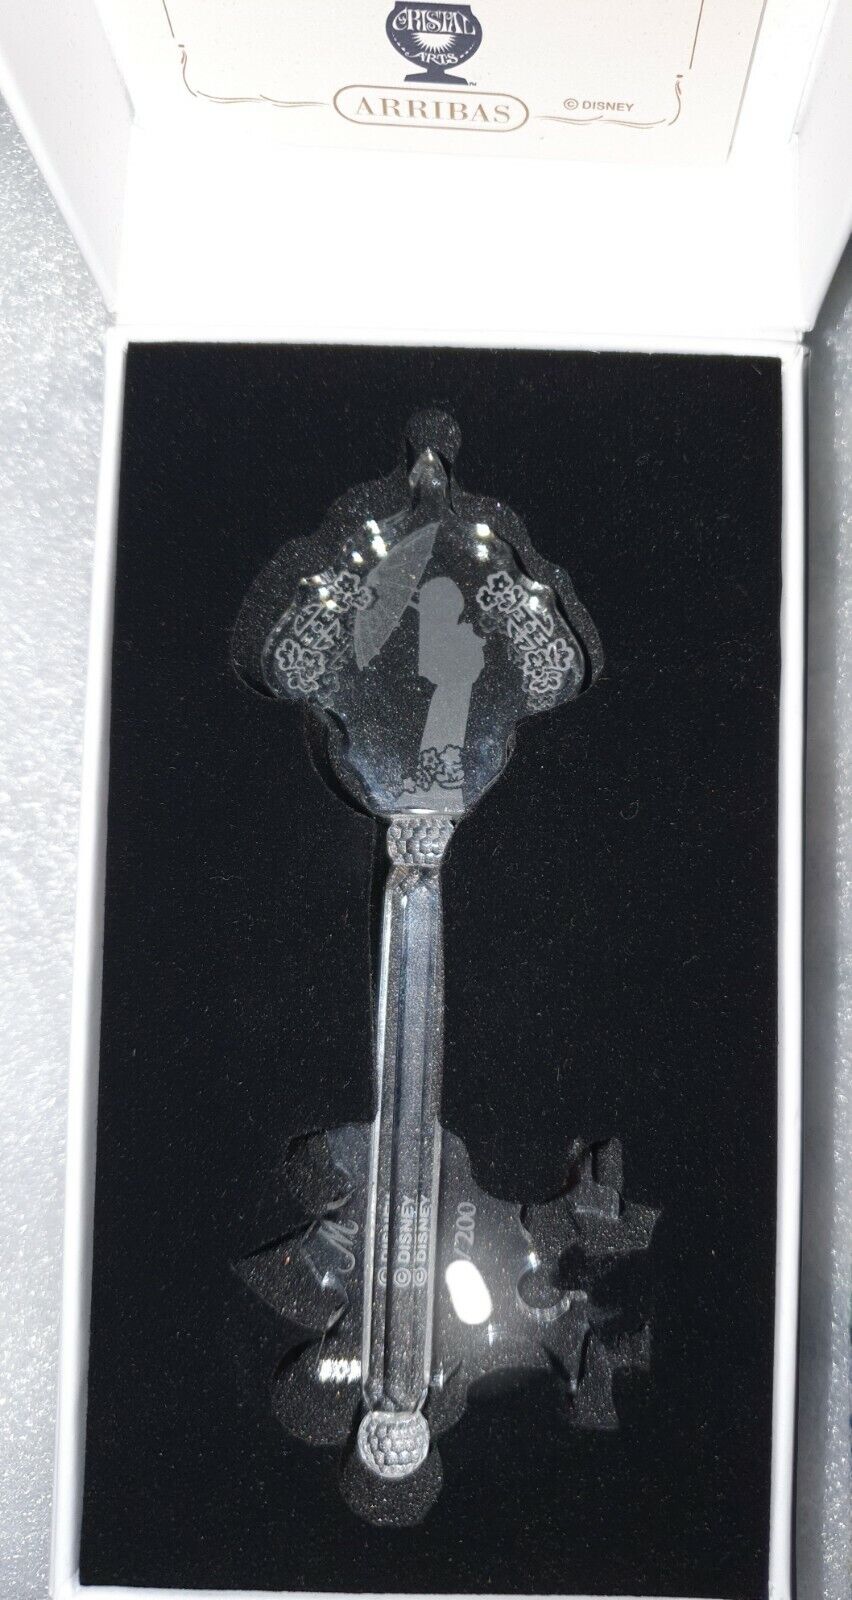 🌟 New Arribas limited Edition 200 Disney Mulan Glass key  Exclusive 🌟